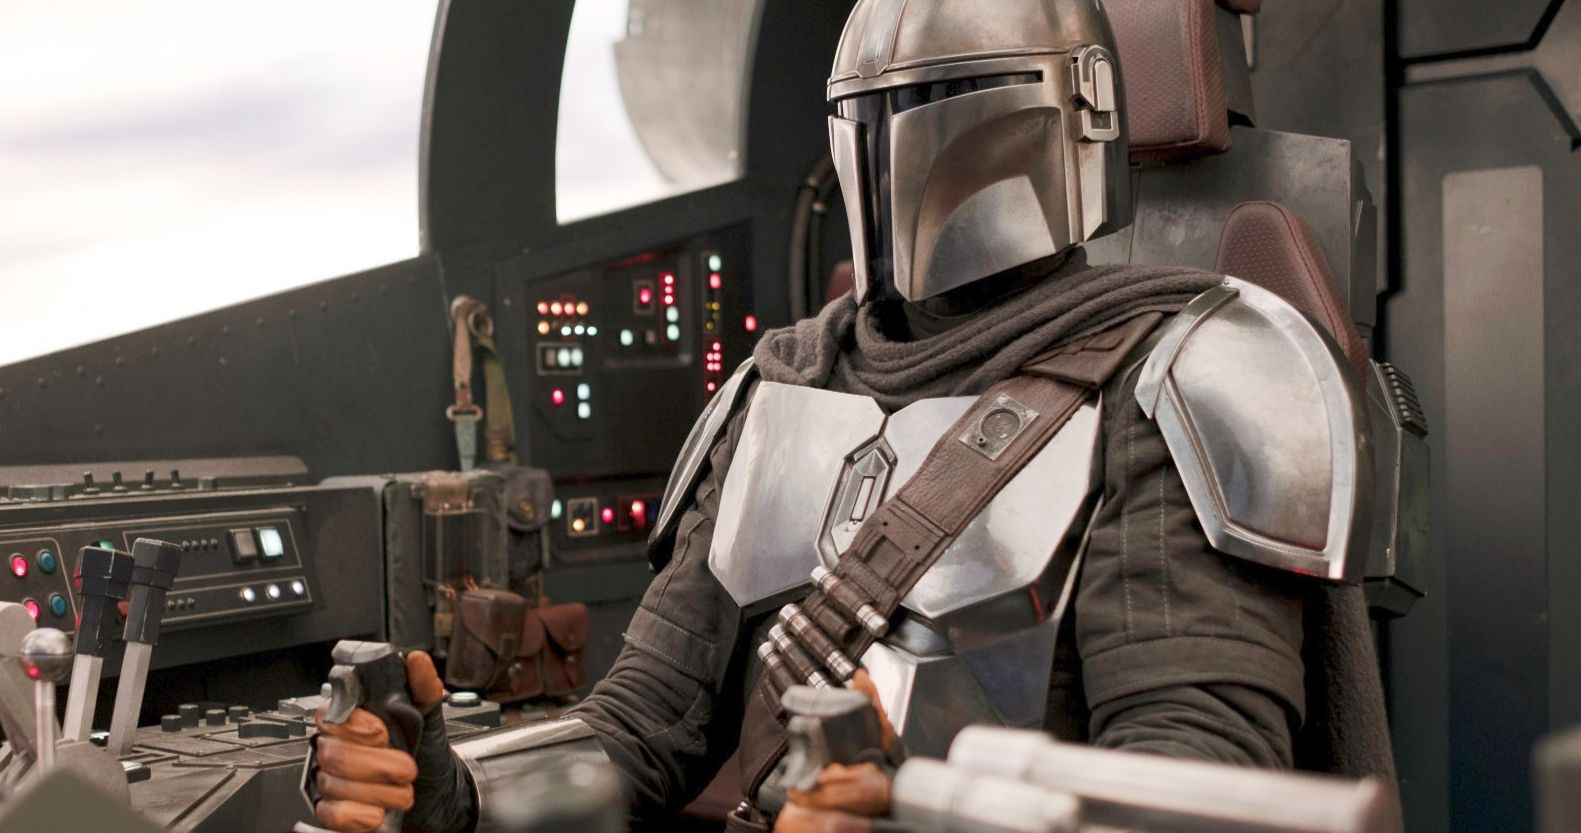 The Mandalorian Episode Release Dates Announced, Will Avoid Rise of Skywalker Clash